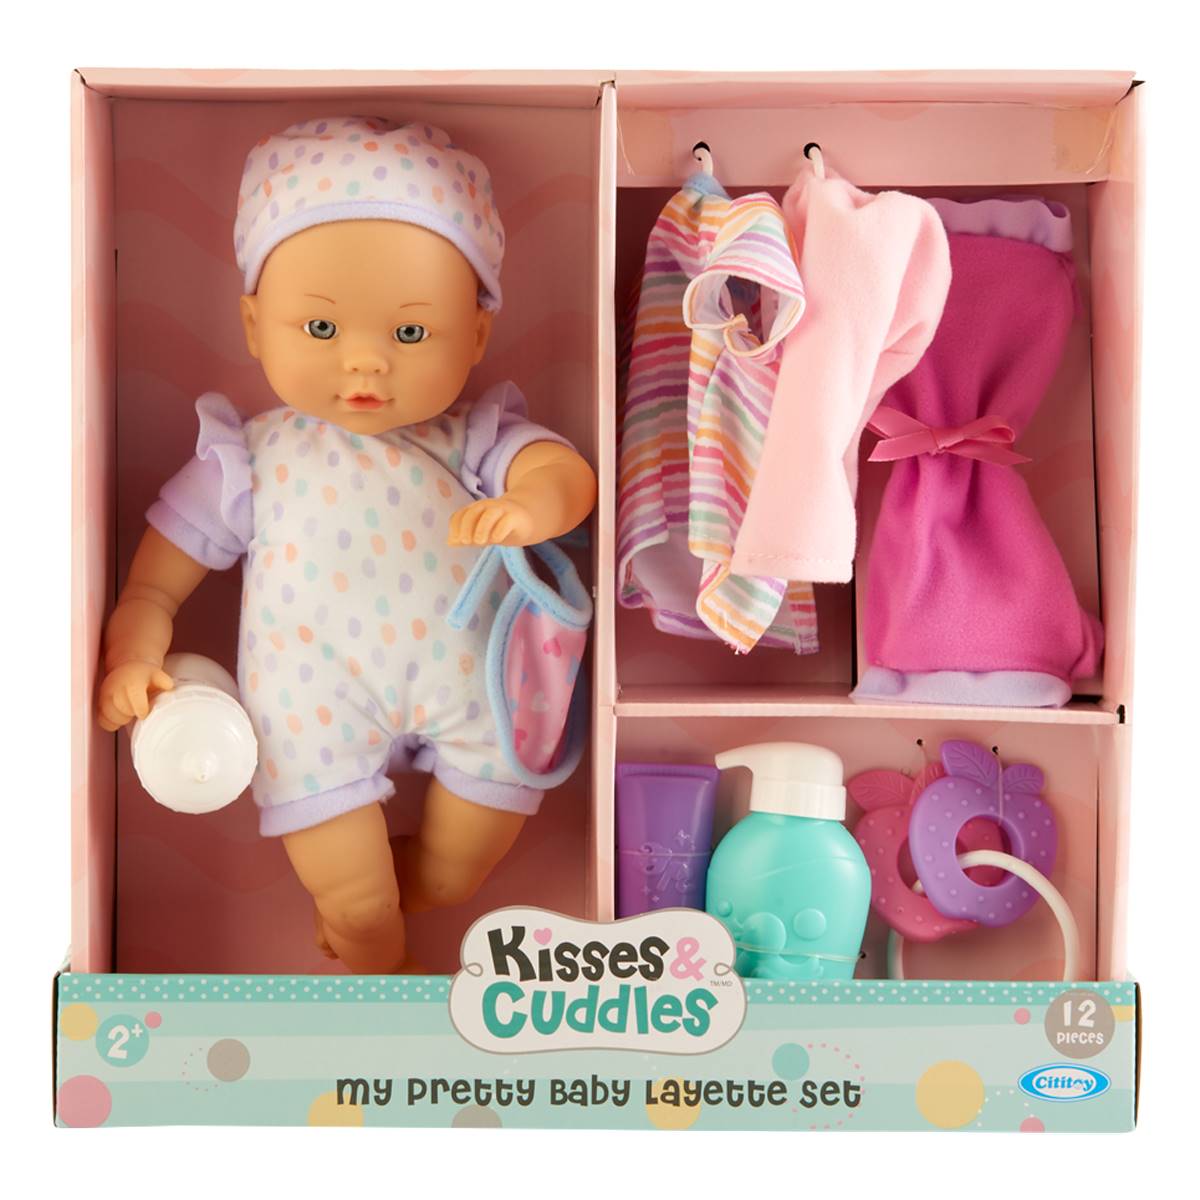 Kisses & Cuddles 13in. Pretty Baby Layette Set